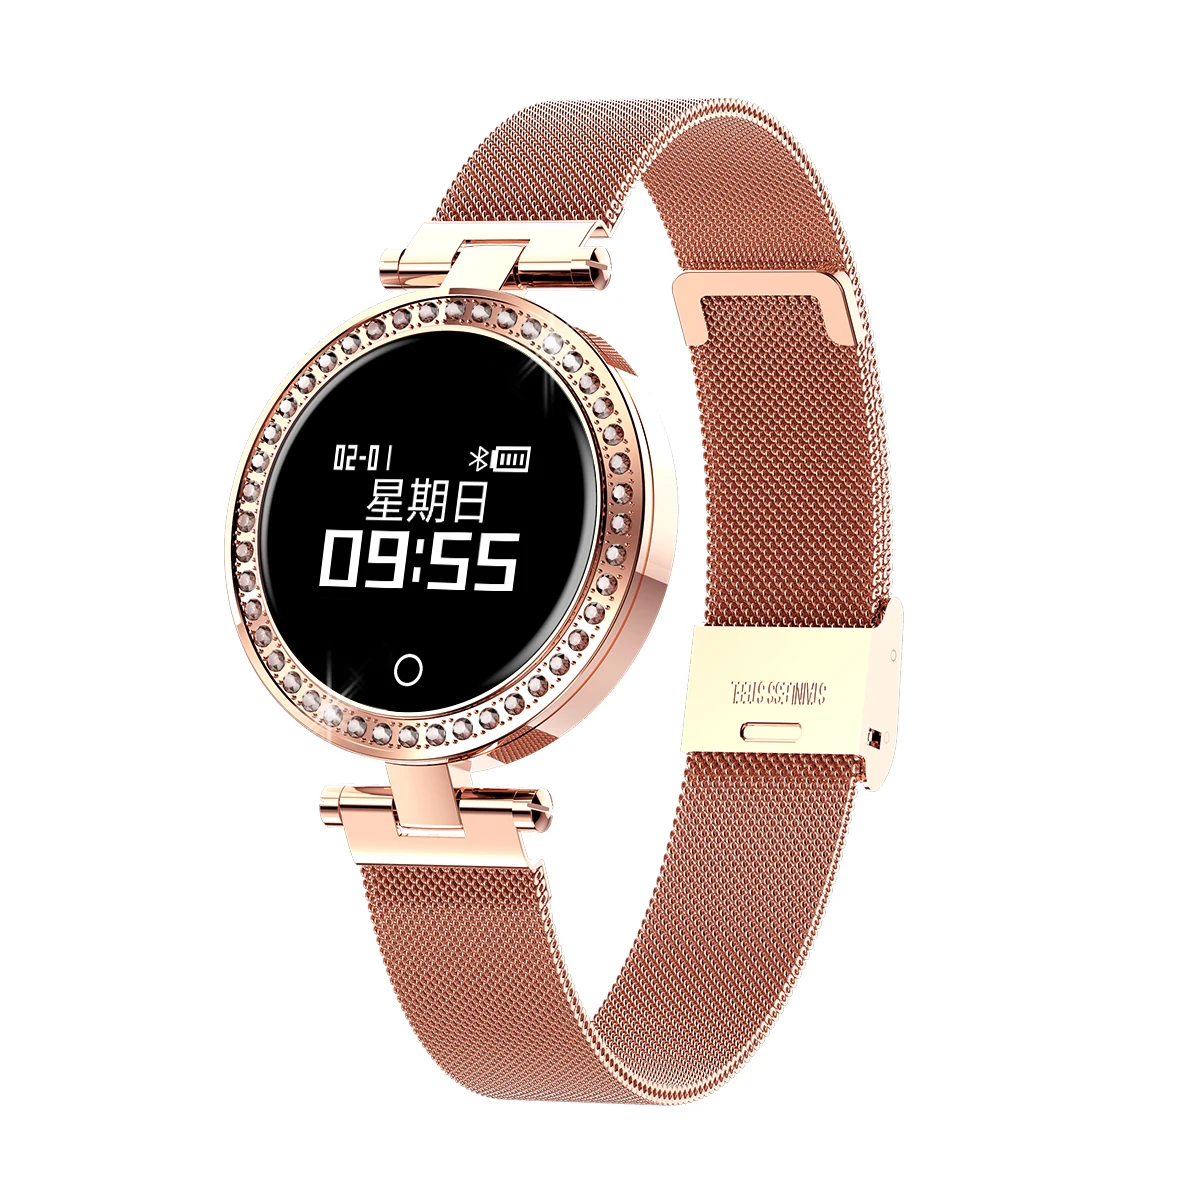 

X10 Ladies Smart Watch Round For Women IP68 Heart Rate Blood Pressure Monitor Message Call Reminder Pedometer Calorie Smartwatch